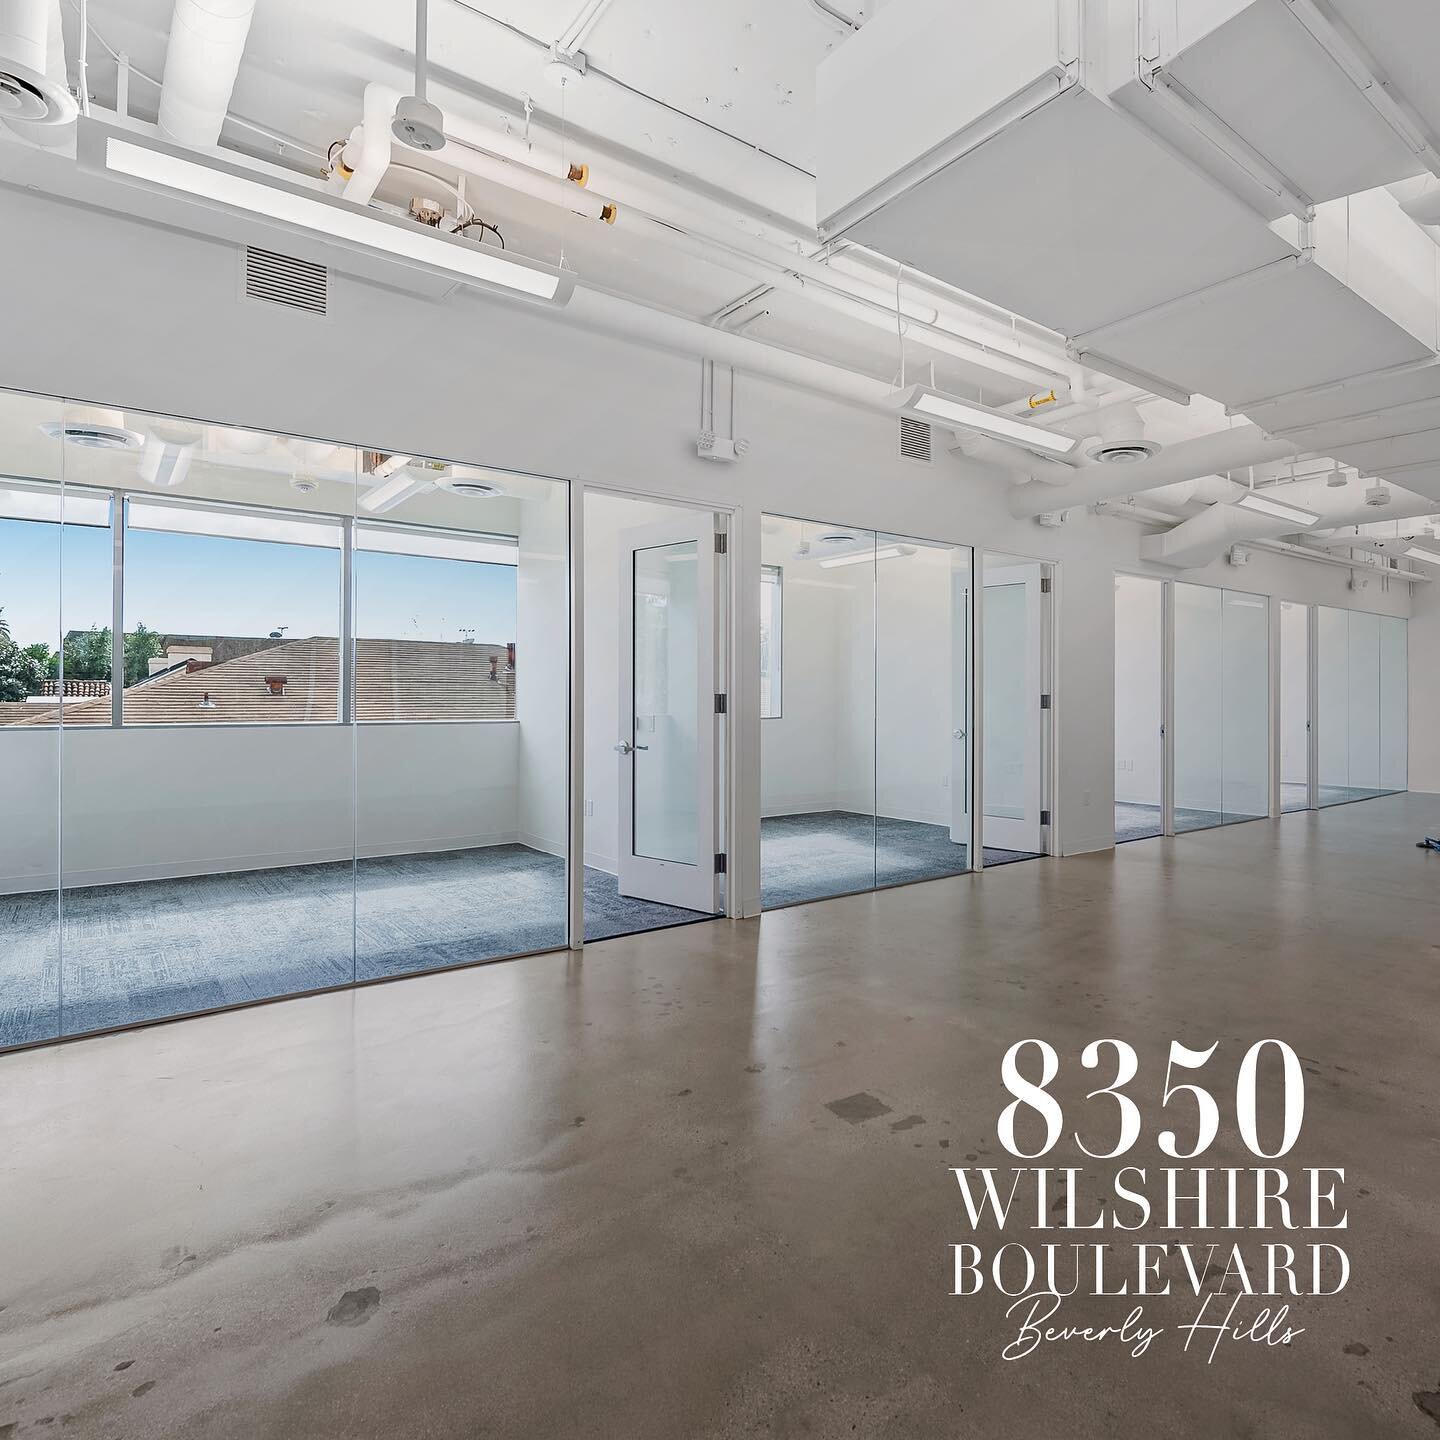 FOR LEASE: Modern Creative Office in Prime Beverly Hills // 8350 Wilshire Blvd, Suite 215

- Size: 2,994 SF
- Class A 2nd floor office&nbsp;on&nbsp;prime stretch of Wilshire Blvd in Beverly Hills
- Space is built out with conference room, 3 private o